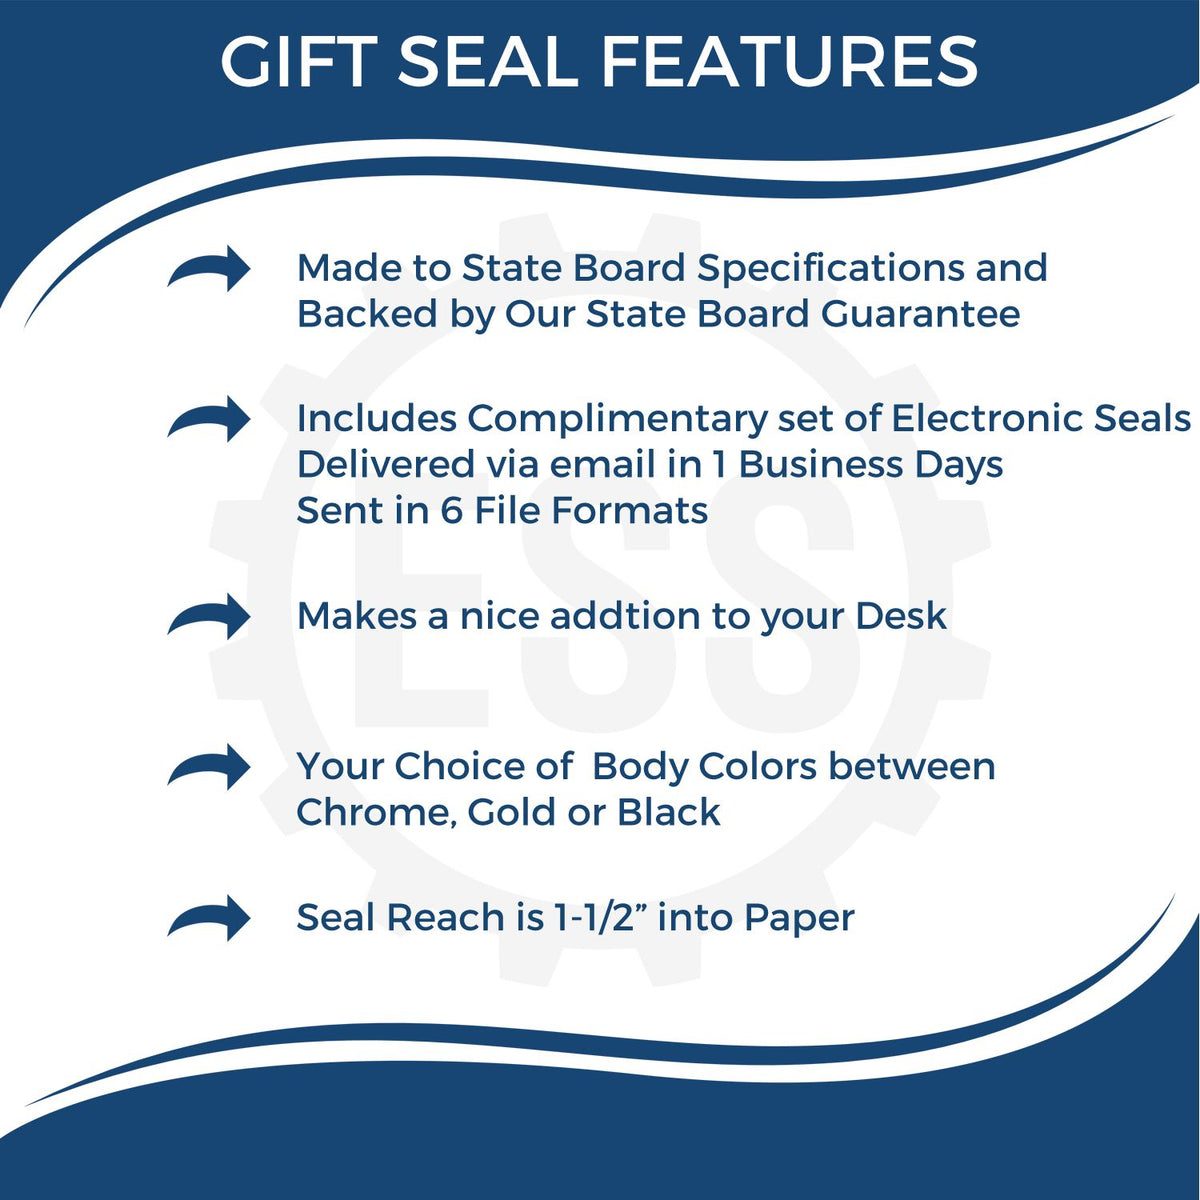 A picture of an infographic highlighting the selling points for the Gift Alabama Architect Seal